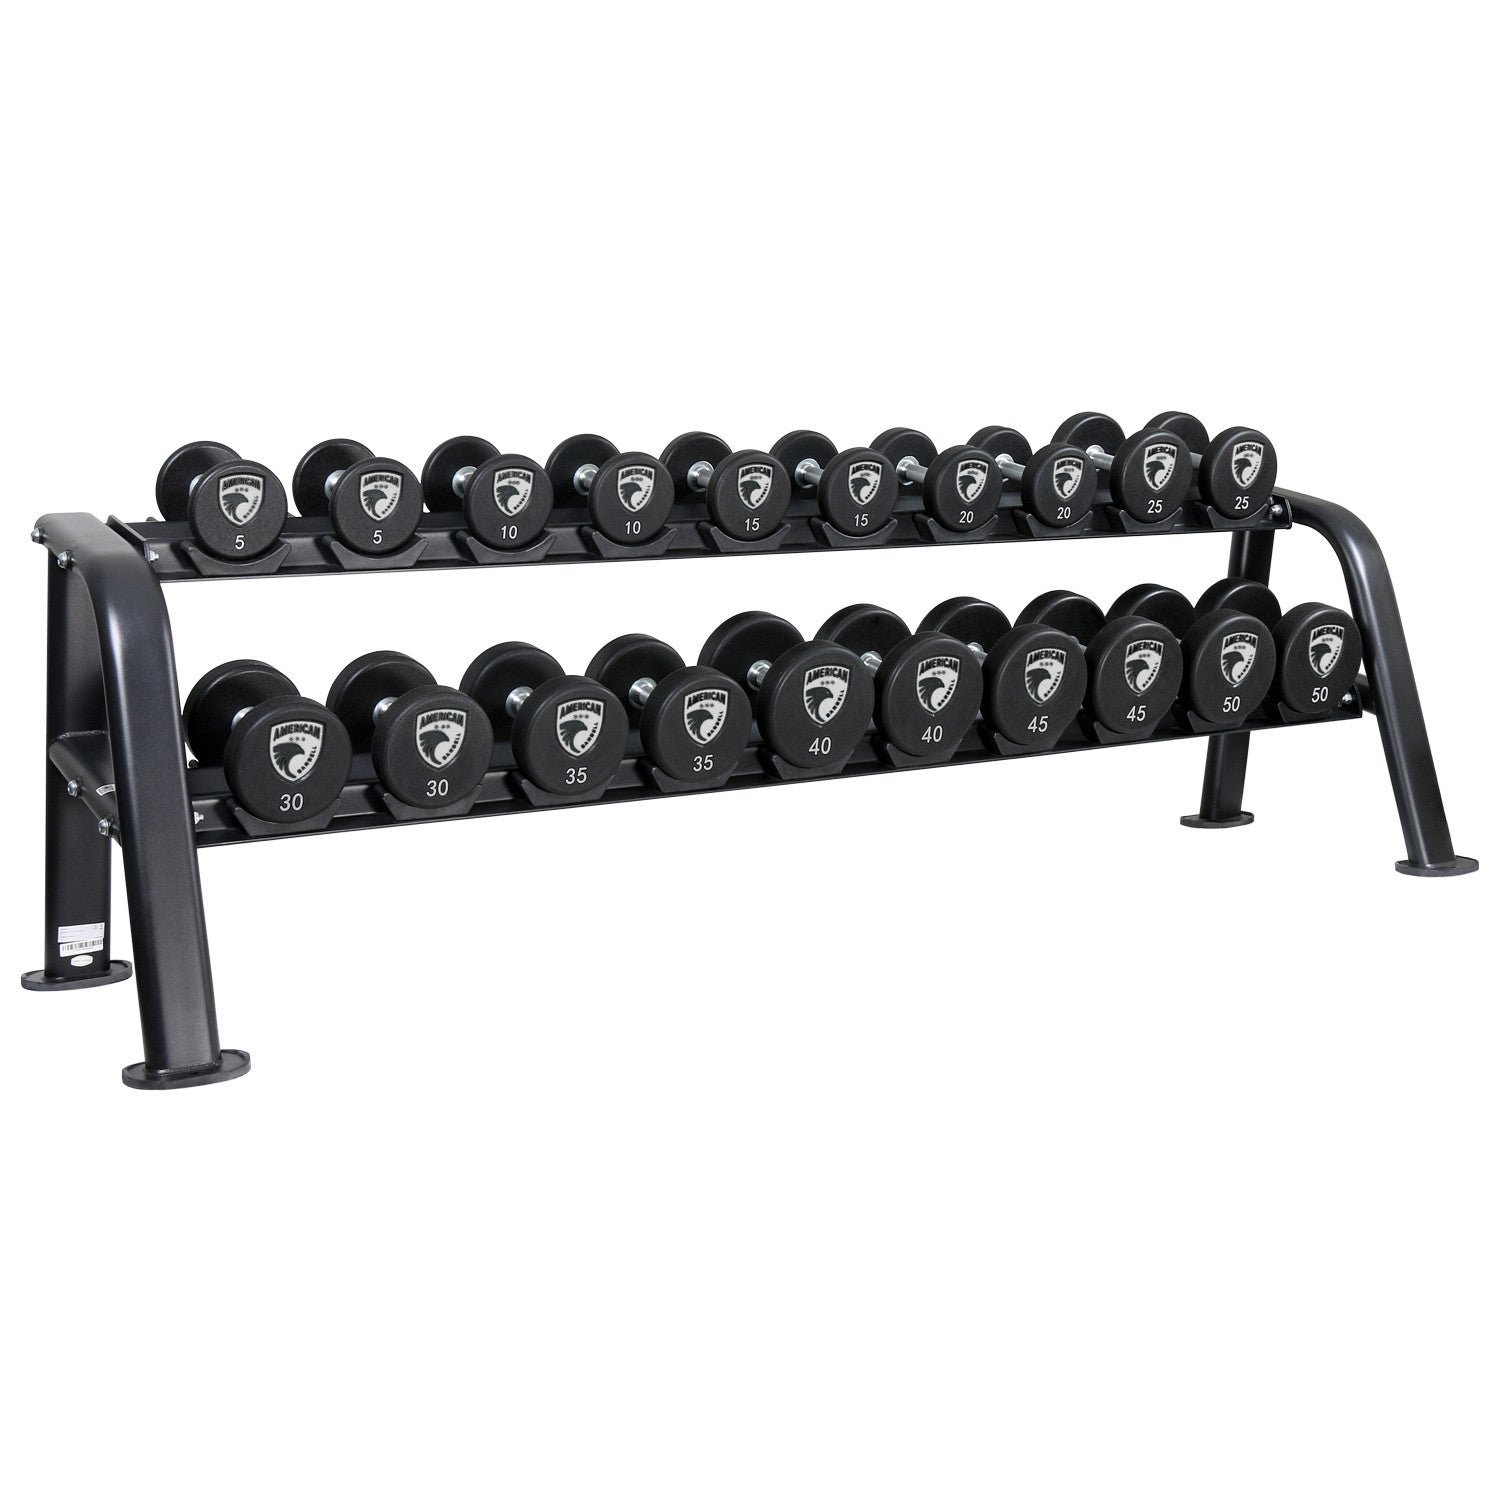 Competition Plate Rack - Bells Of Steel USA